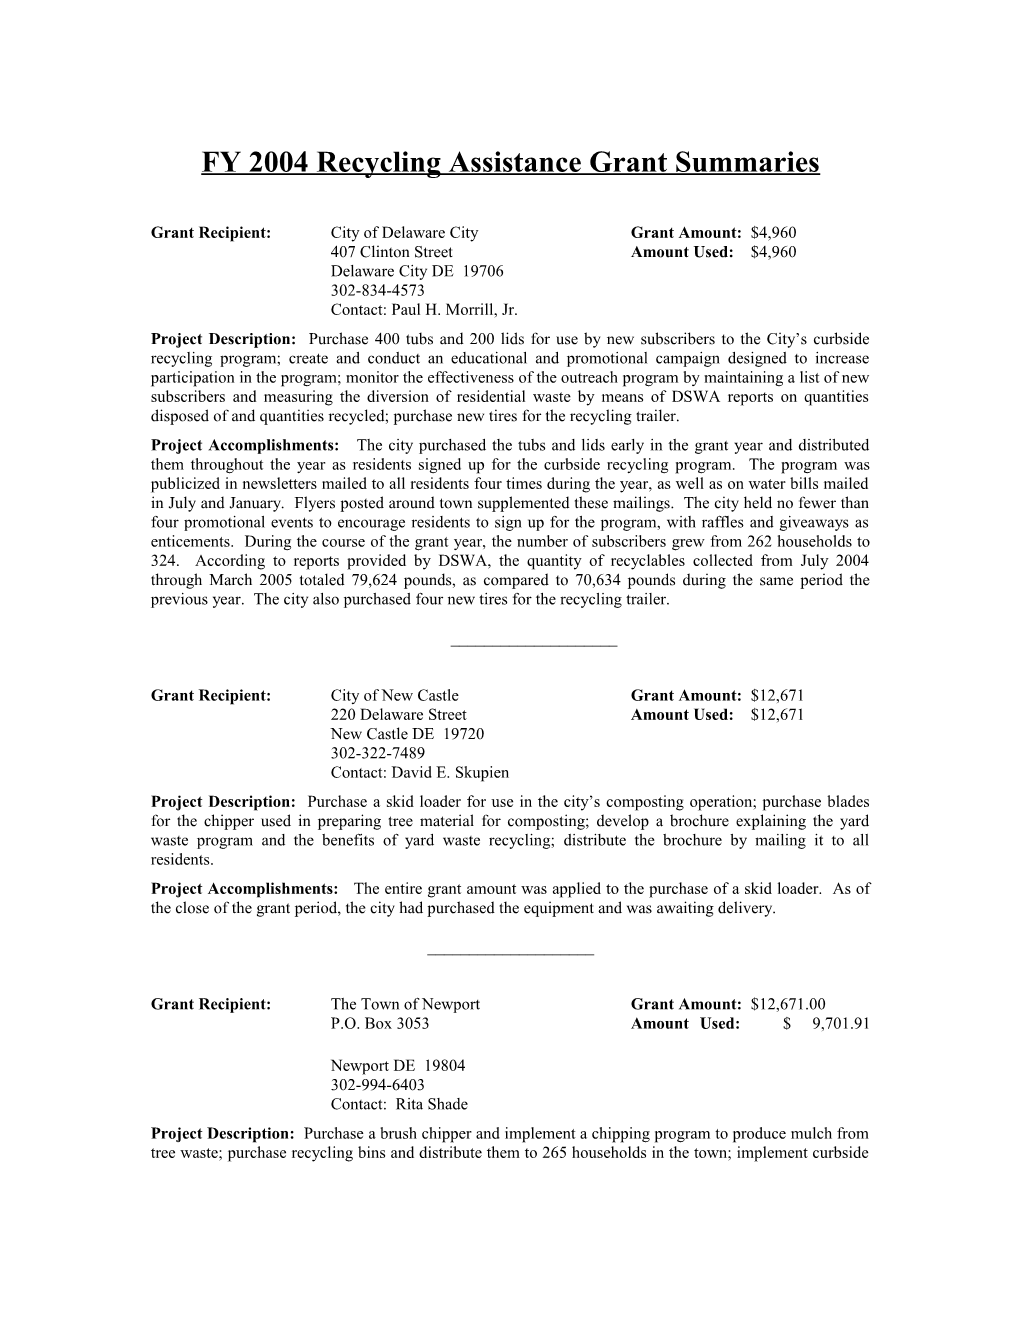 Summaries of Recycling Assistance Grants